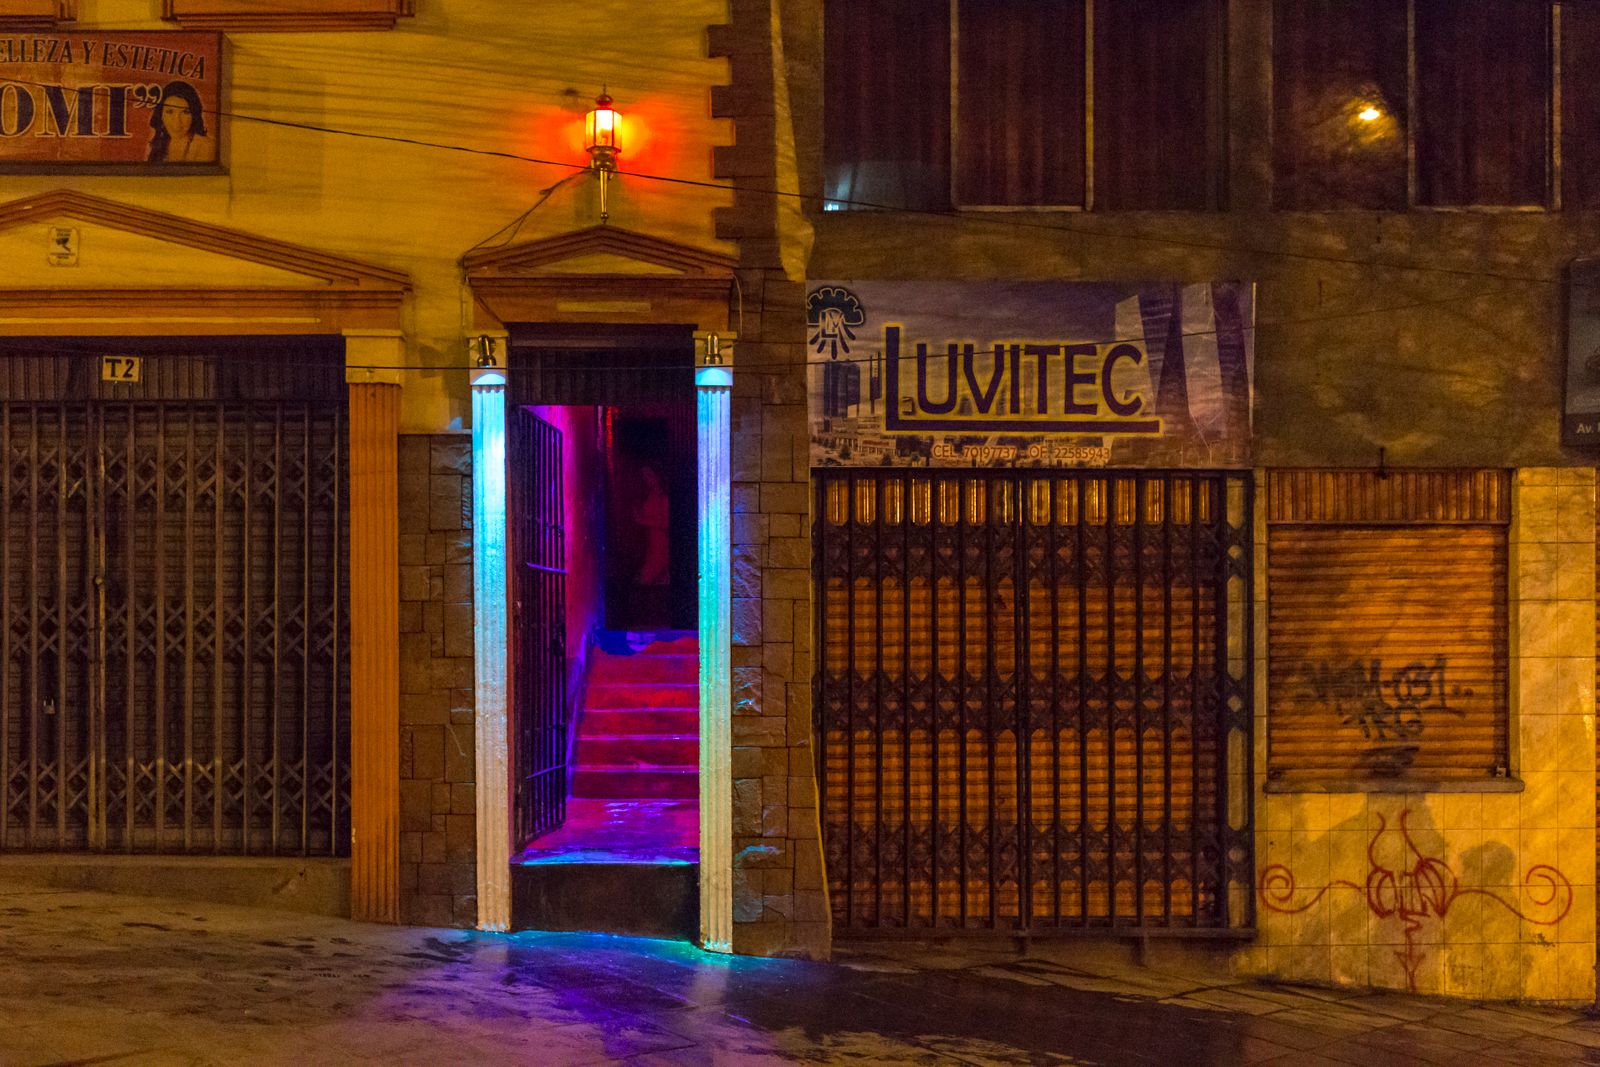 The entrance to a brothel in La Paz, Bolivia. NGOs working with girls who have been sexually exploited fear that Bolivia is turning into a hub for predators. Image by Tracey Eaton. Bolivia, 2017.